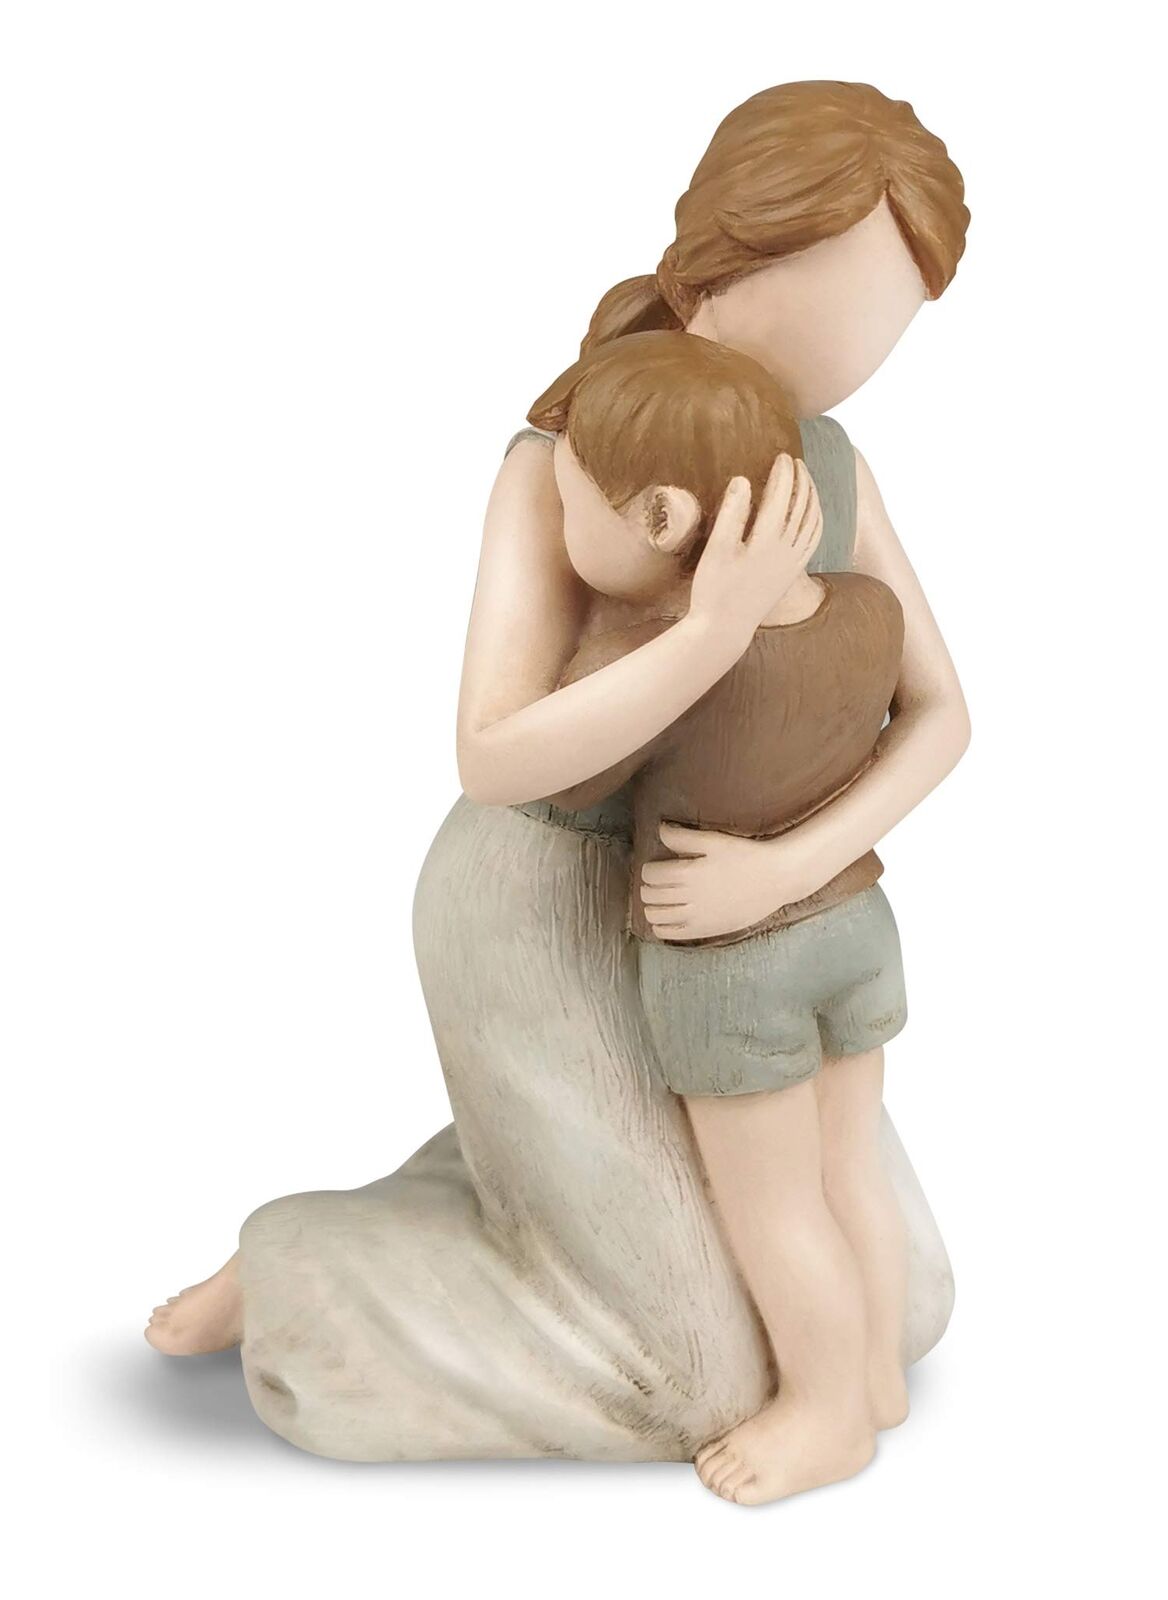 Mother and Son Figurines Statues, The Greatest Bond Mon and Child Sculptures,...